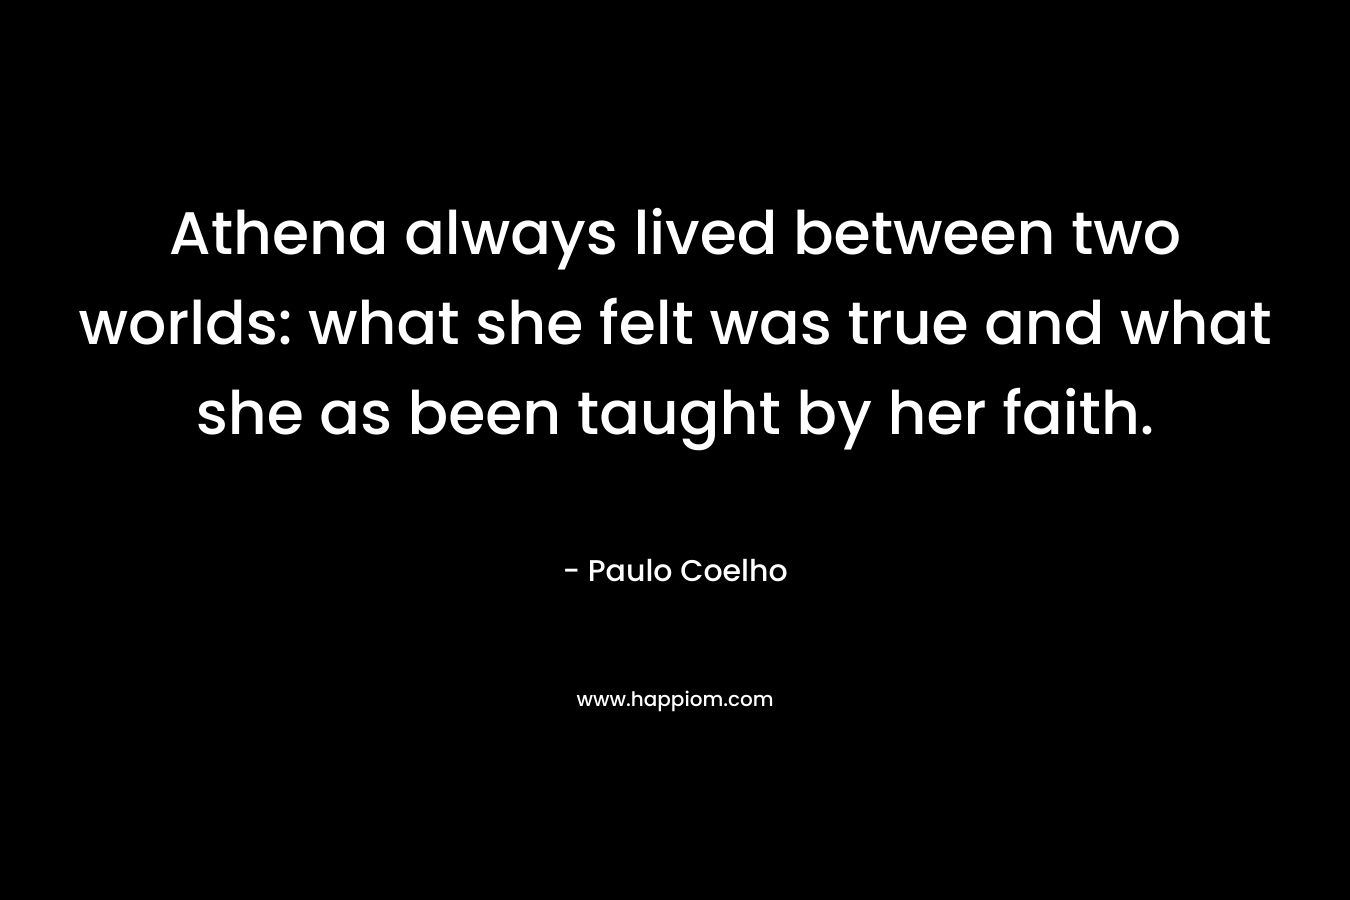 Athena always lived between two worlds: what she felt was true and what she as been taught by her faith. – Paulo Coelho